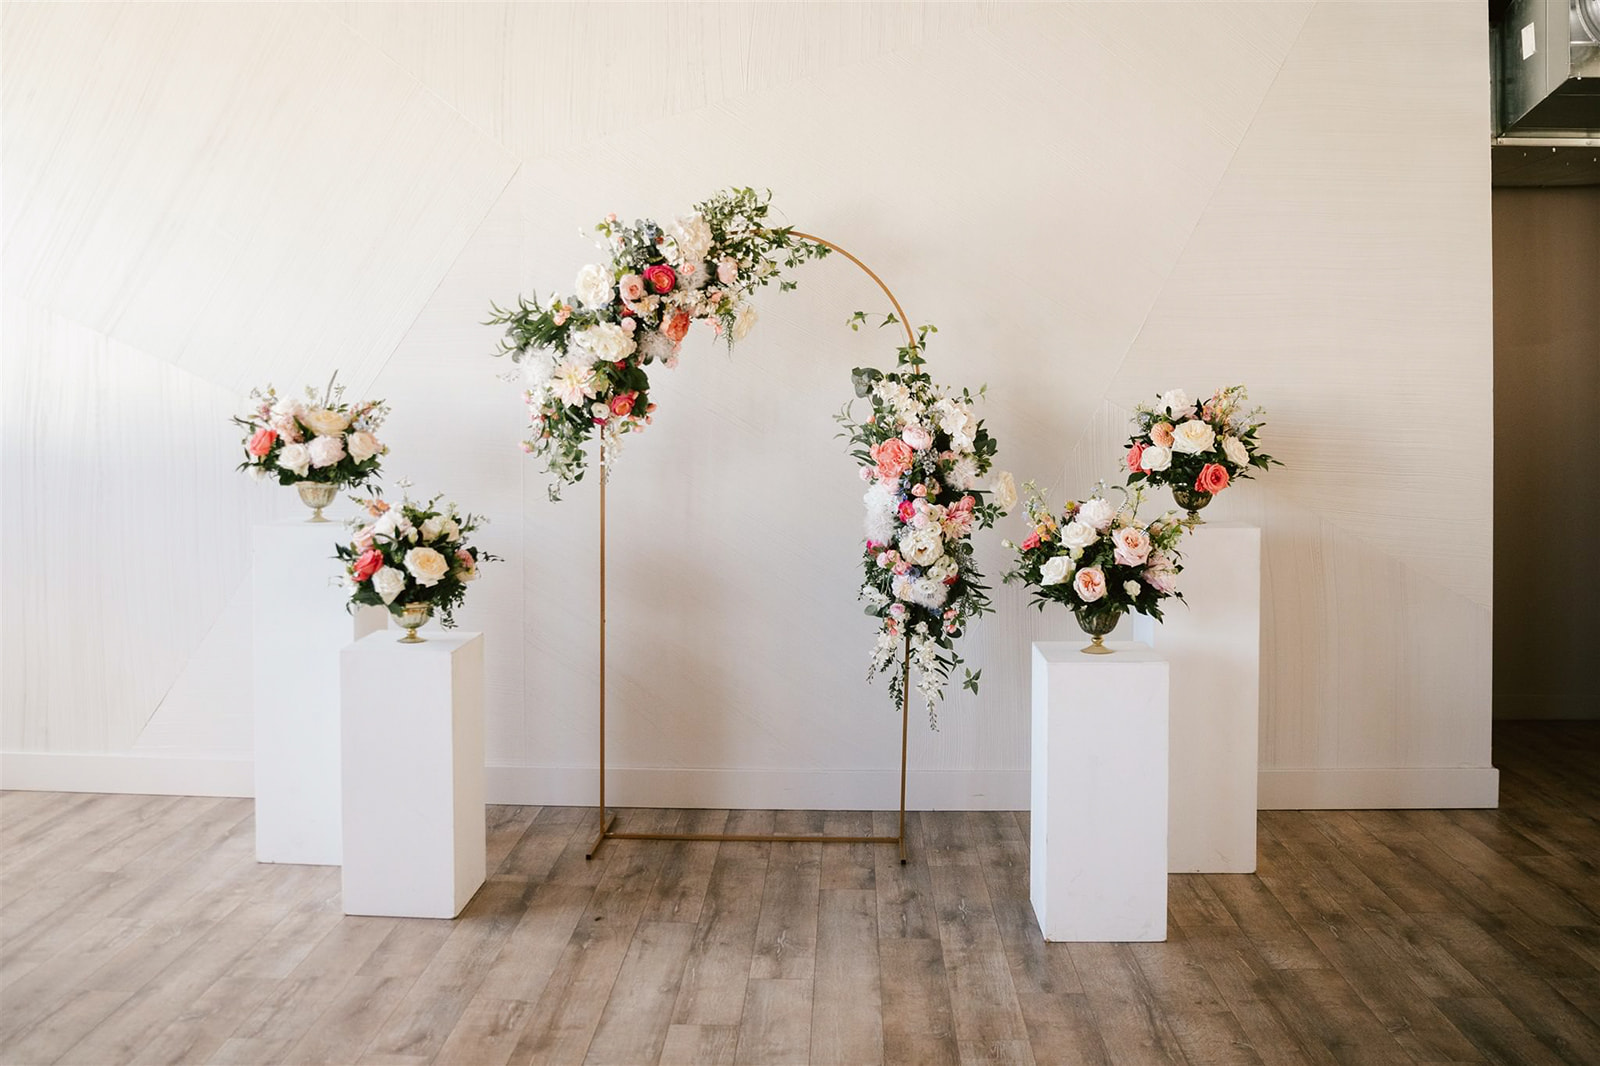 At Walden Chicago, vibrant blooms in shades of peach, coral, and white adorn the wedding venue, adding a burst of color.